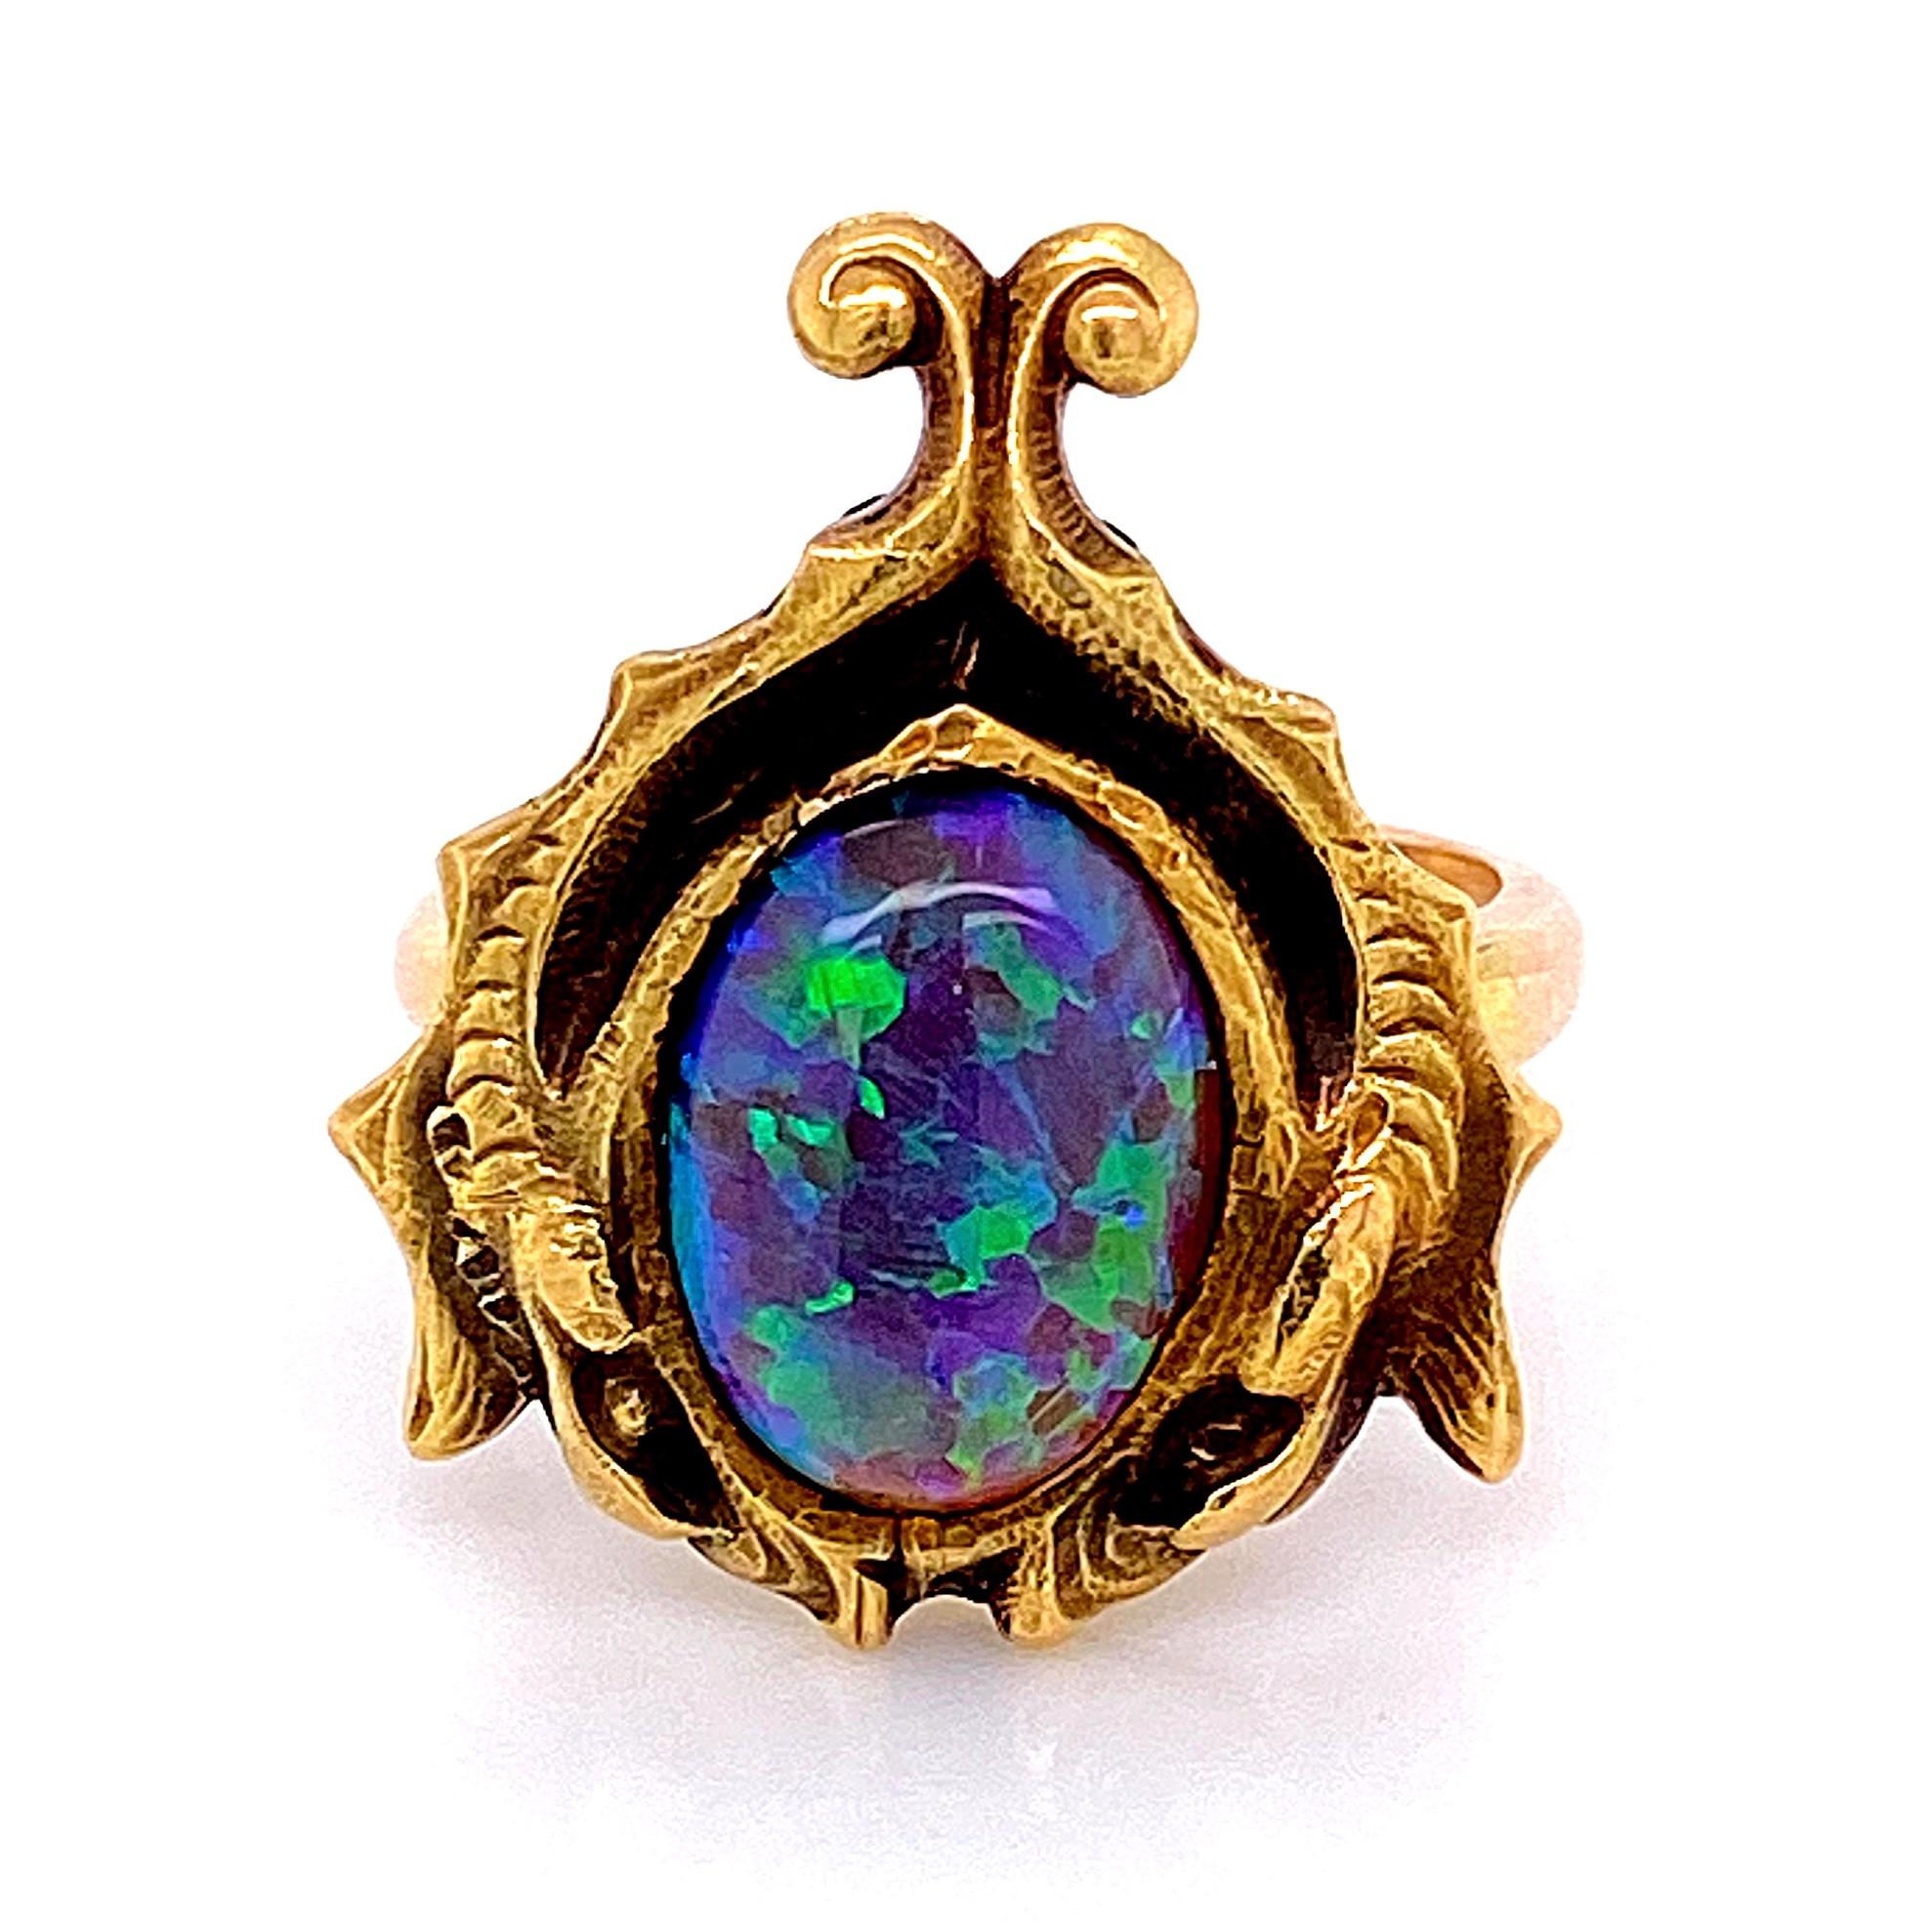 Amazing and Simply Beautiful Cocktail Ring, securely set with a blue-green Australian Lightning Ridge Black Opal in a finely detailed period correct 1930s, 18 Karat Gold Hand crafted mounting featuring abstract leaves shaped like wings.  Size 6, we